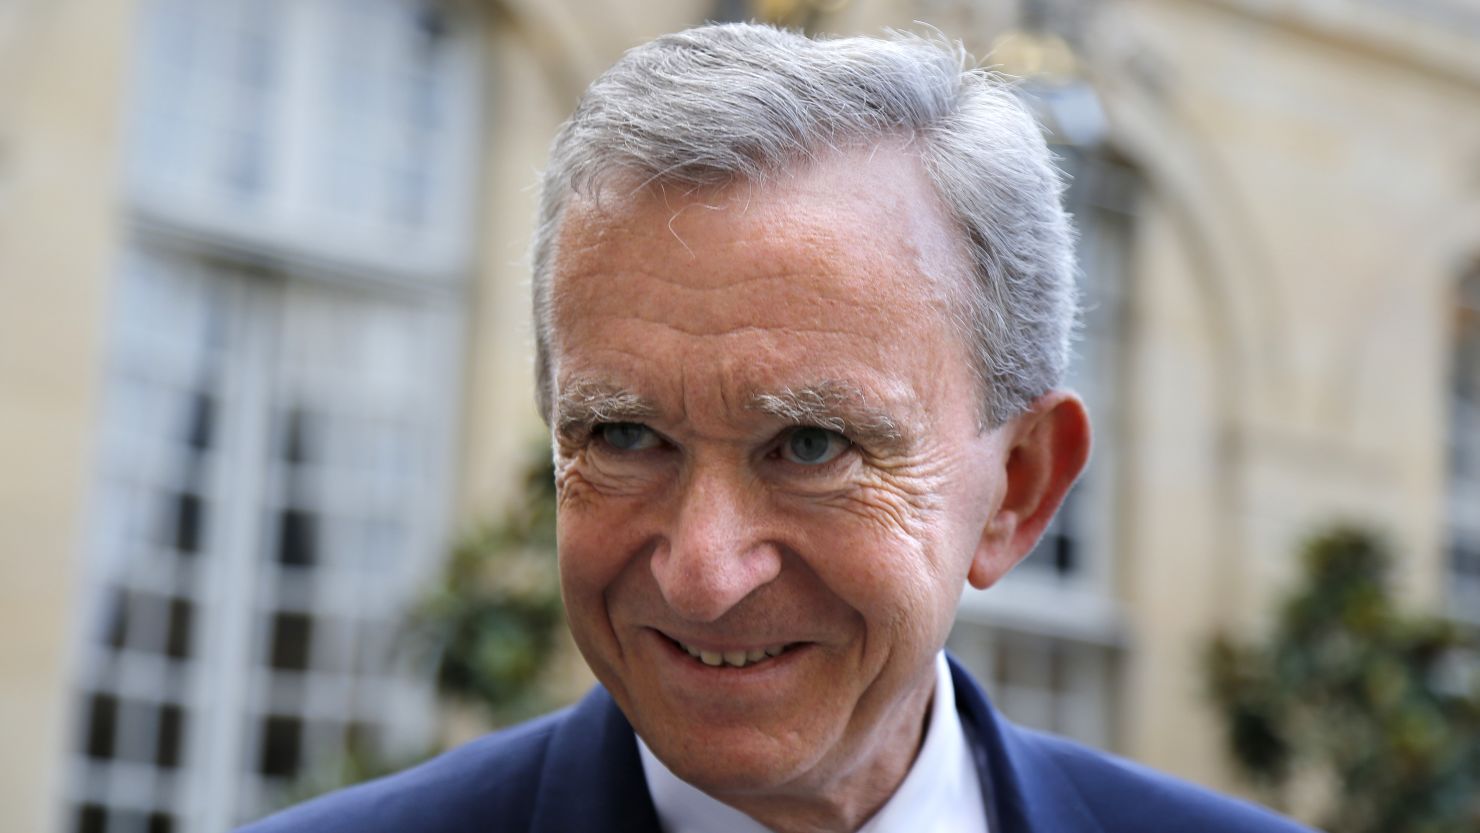 Bernard Arnault, France's richest man, says he will remain a tax resident of France despite a new 75% tax rate.